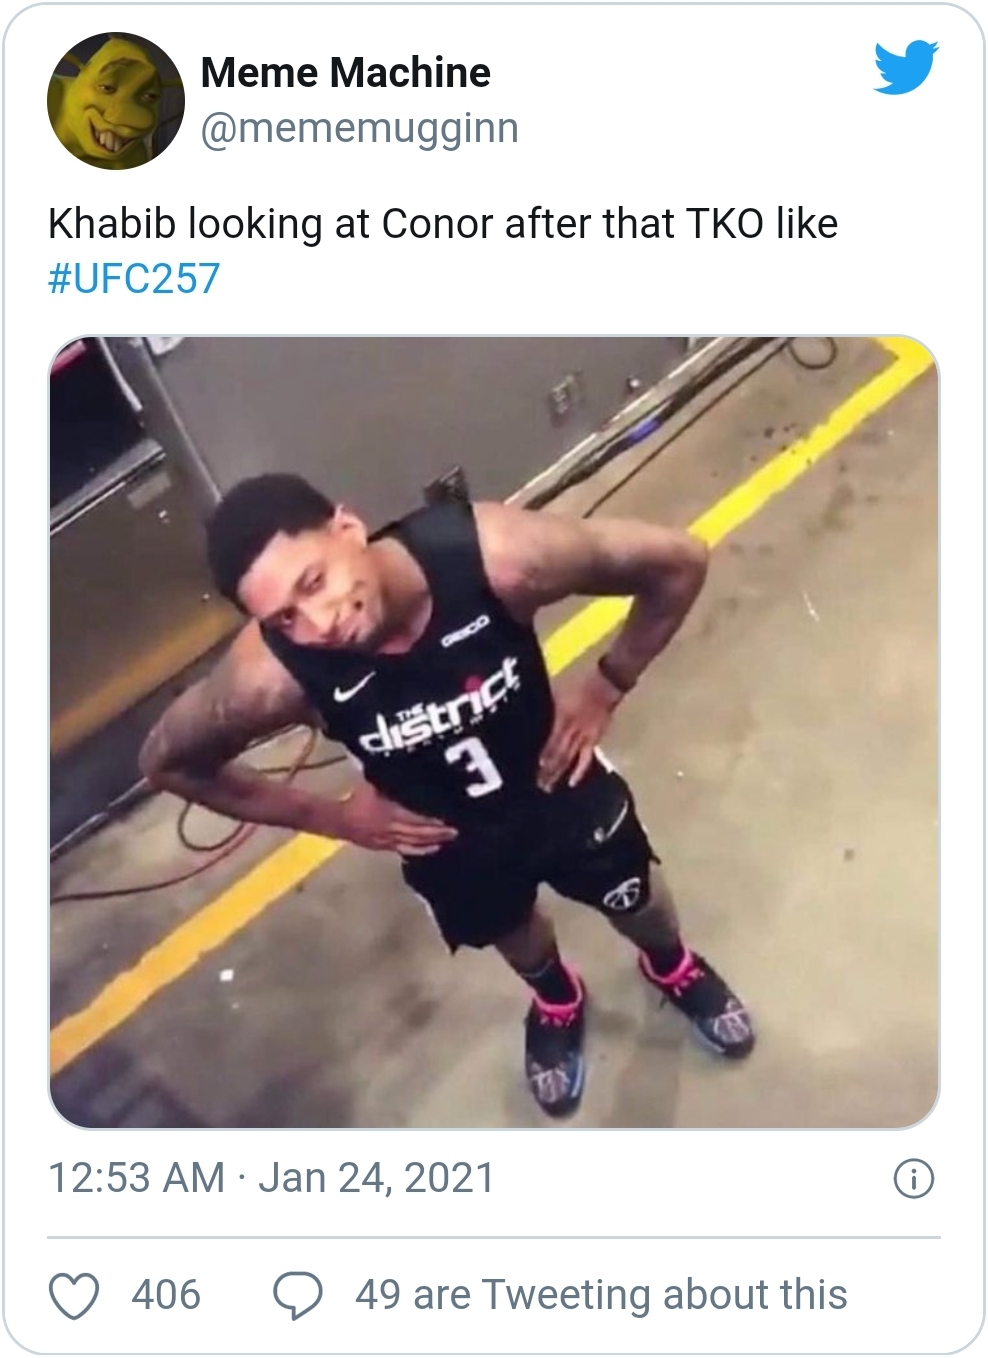 bradley beal meme - Meme Machine Khabib looking at Conor after that Tko district 3 406 49 are Tweeting about this